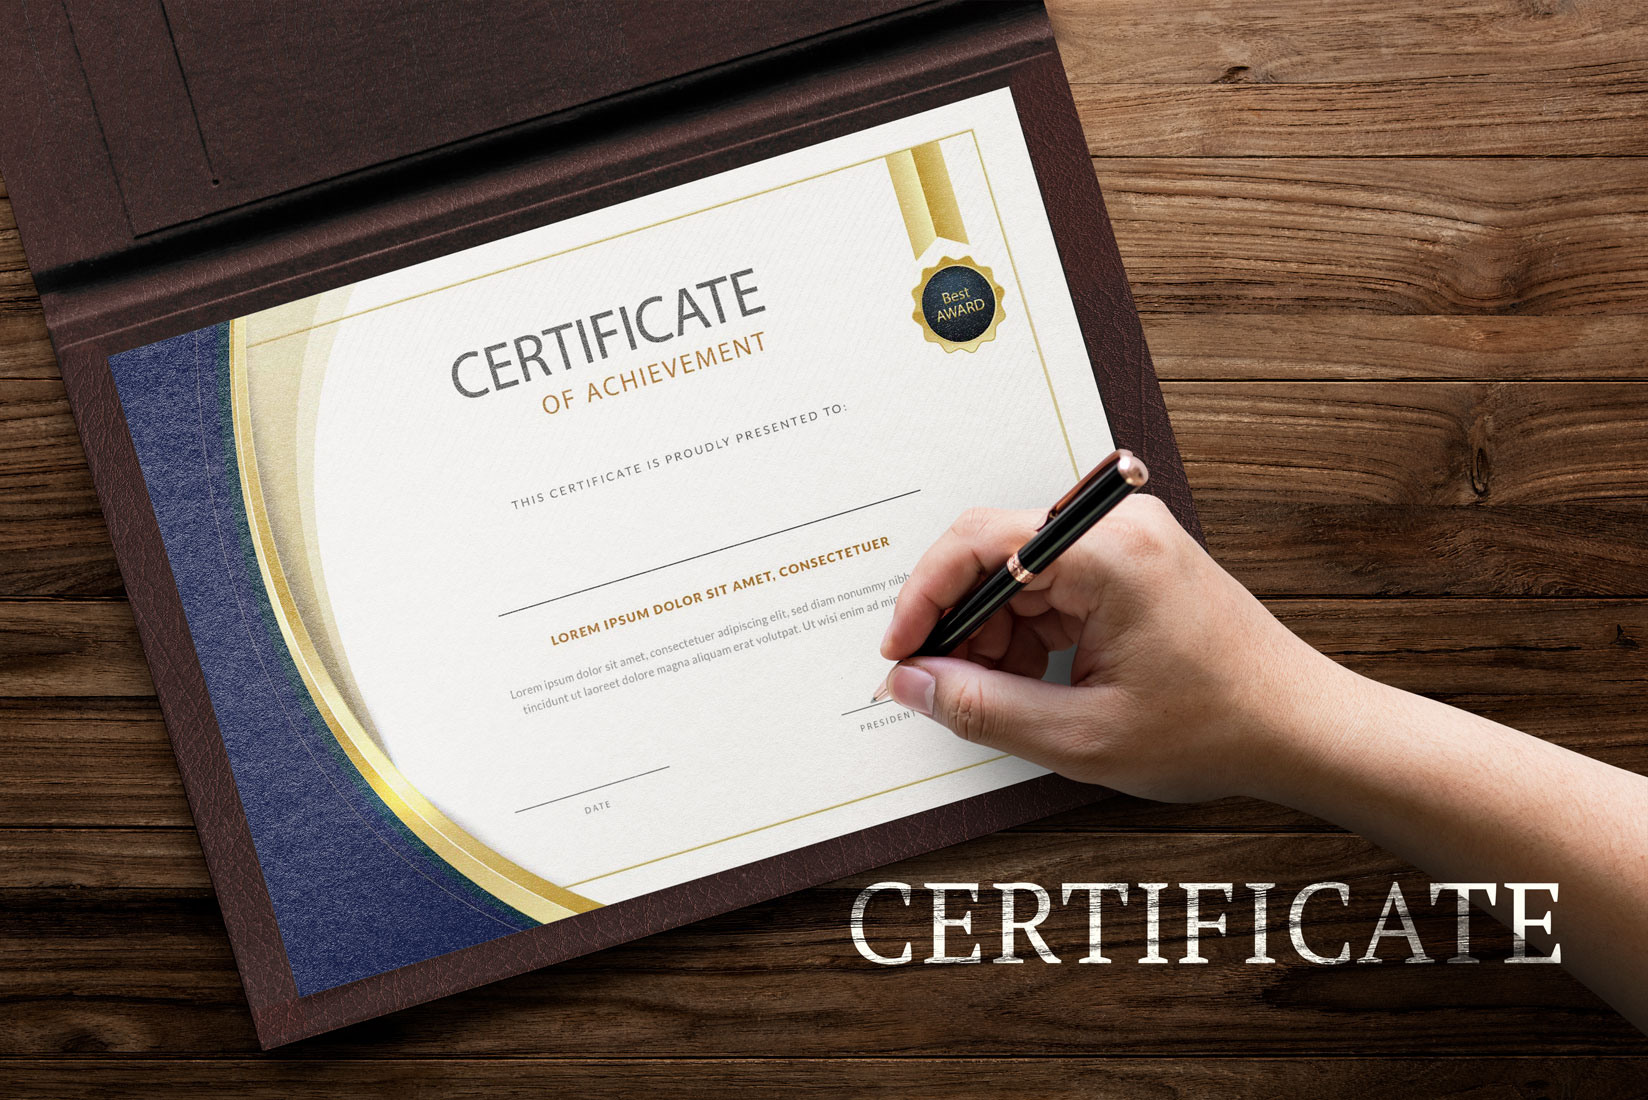 Person holding a pen and writing on a certificate.